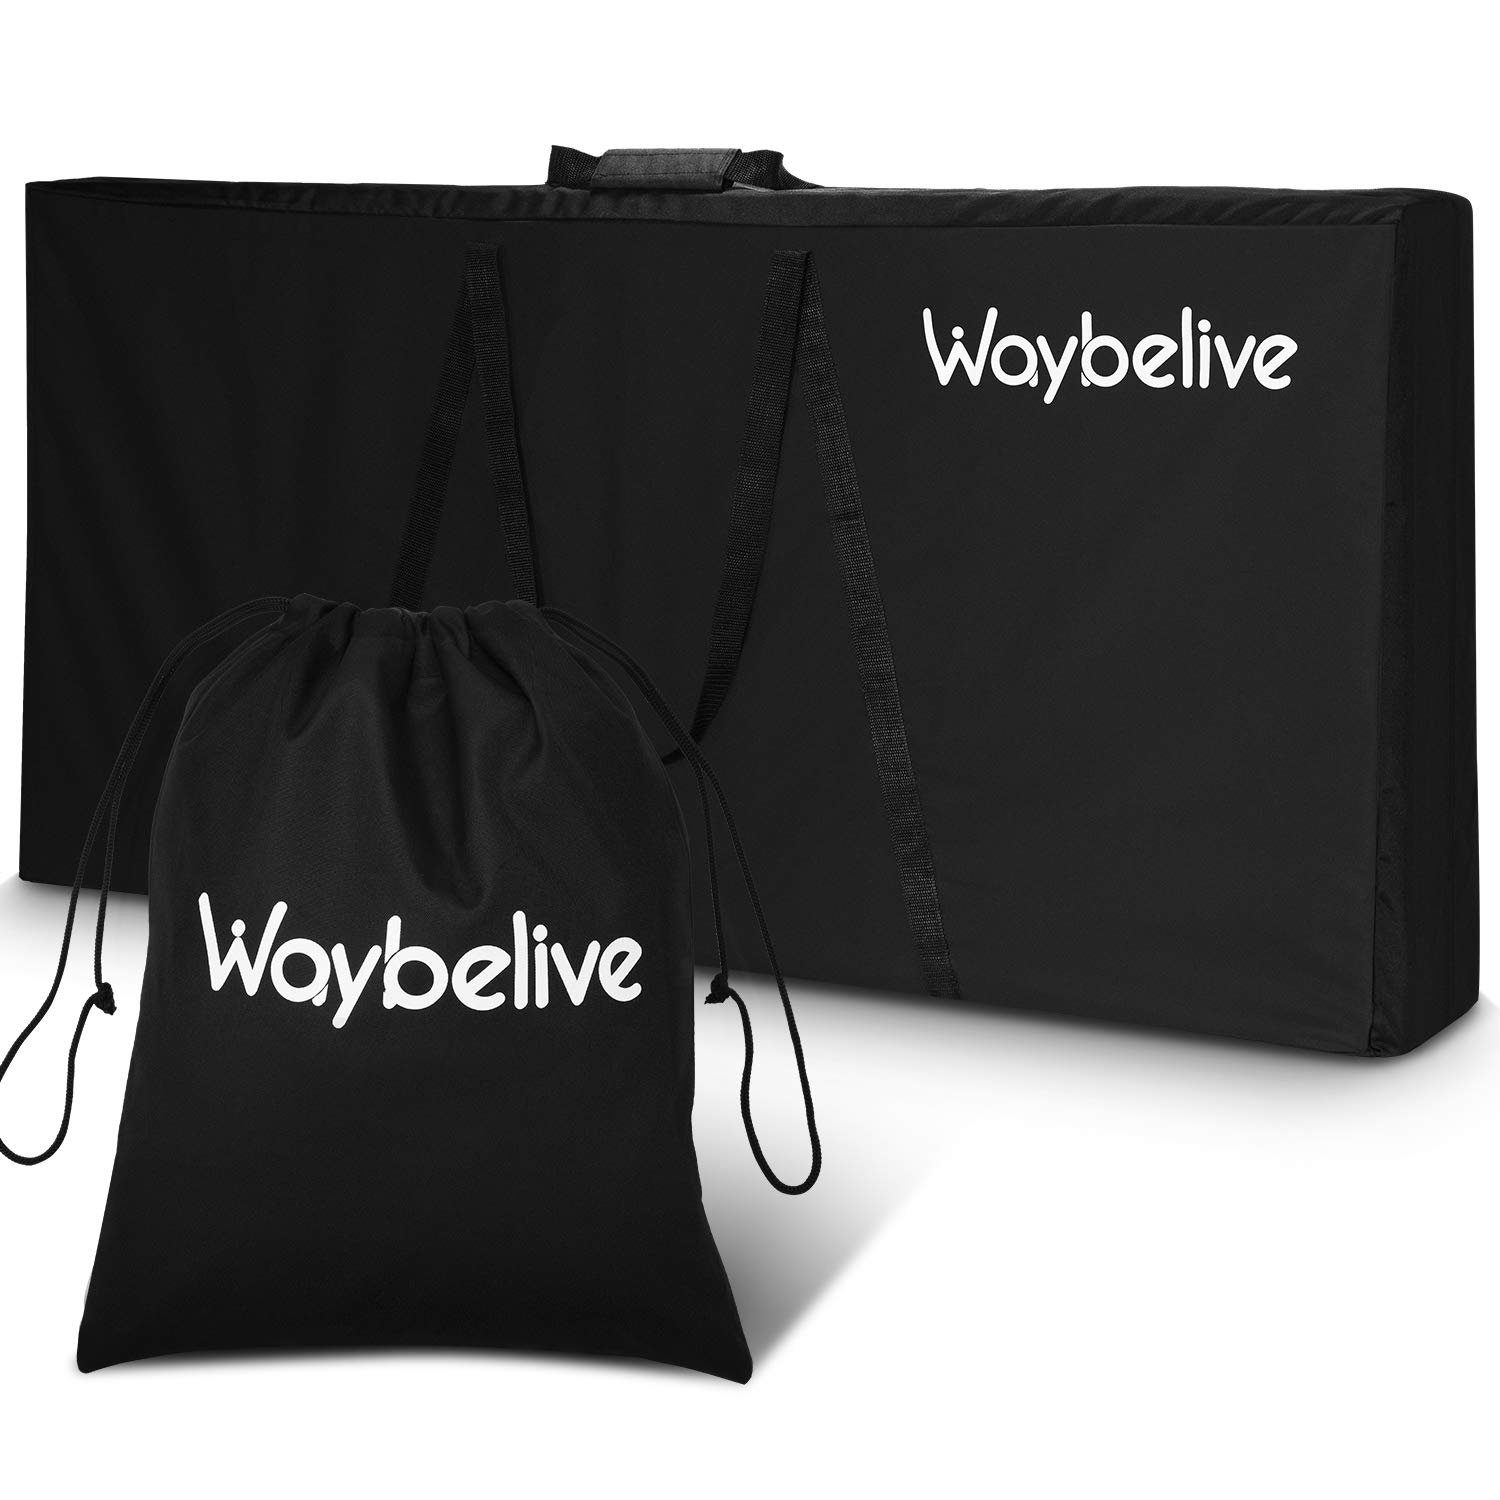 Waybelive 2 Pieces Bean Bag Game Carrying Bag Canvas Cornhole